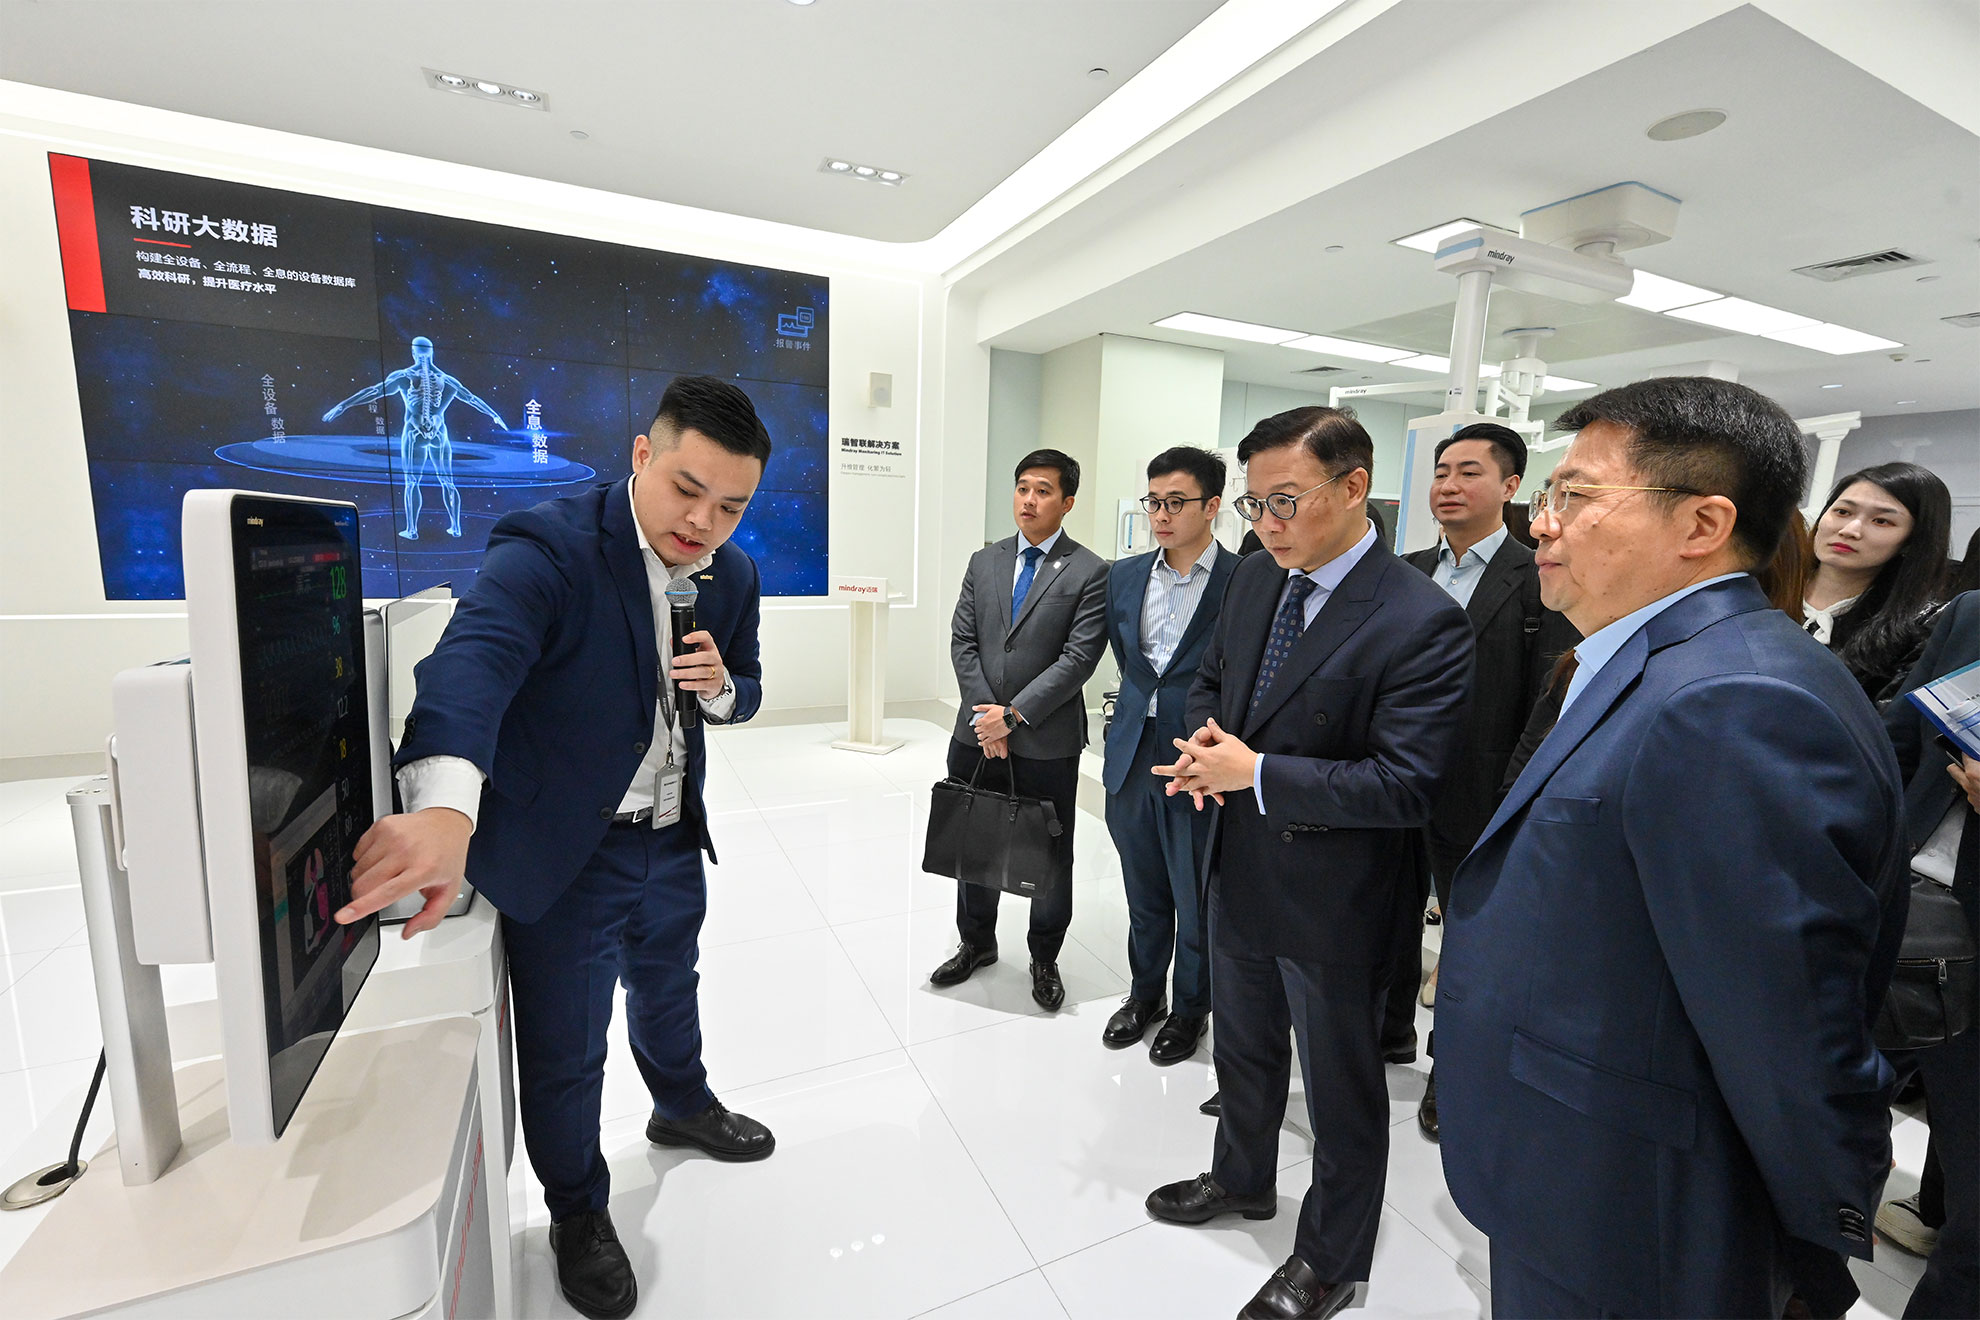 The Deputy Secretary for Justice, Mr Cheung Kwok-kwan, and a delegation of young lawyers led by him today (November 17) finished the first stop, Shenzhen, of their visit to Mainland cities of the Greater Bay Area. Photo shows Mr Cheung (second right) and the delegation visiting Mindray Biomedical Electronics Co., Ltd.